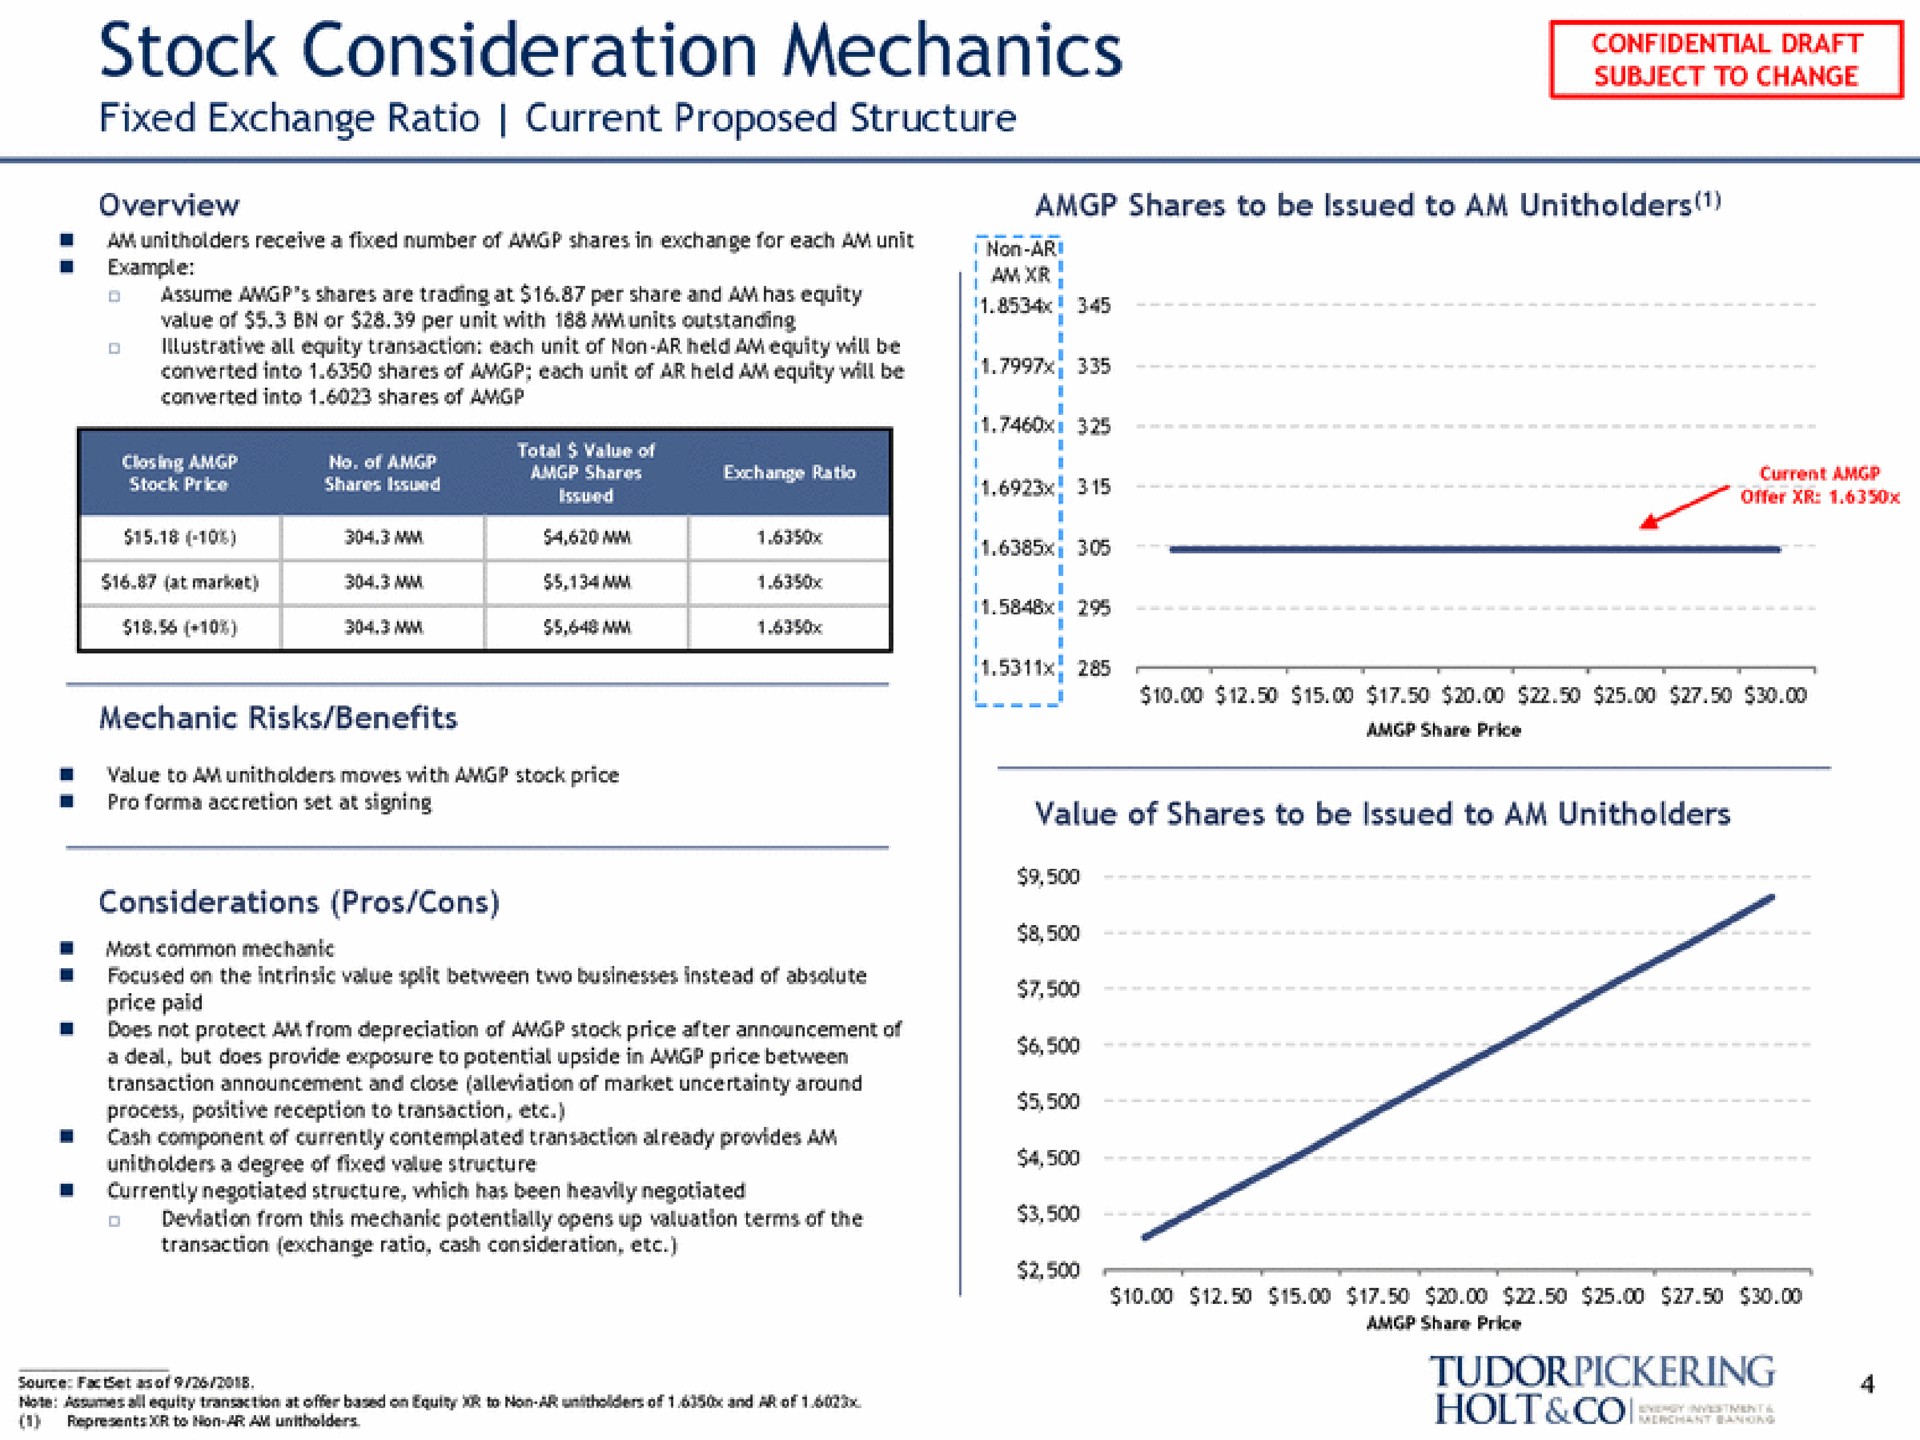 stock consideration mechanics fixed exchange ratio current proposed structure | Tudor, Pickering, Holt & Co